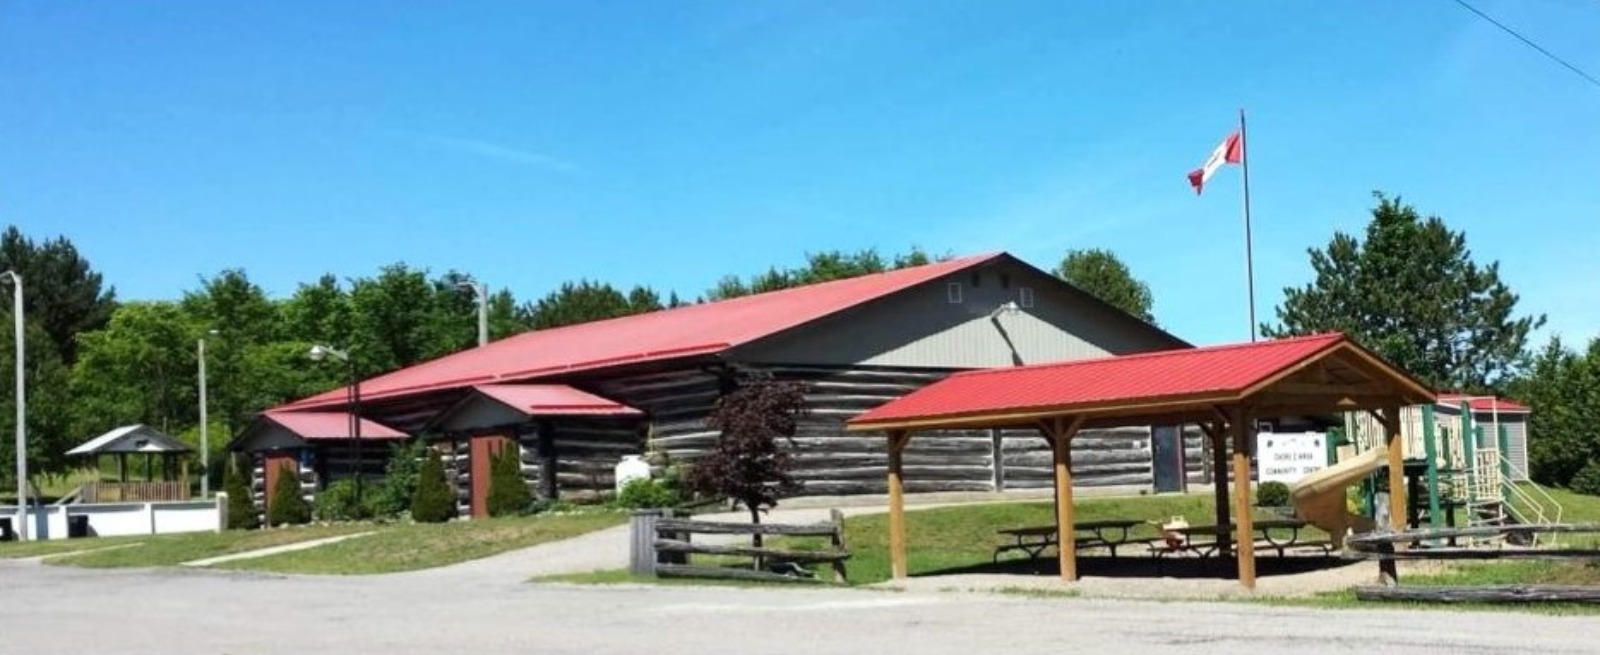 daca centre log building with red roof